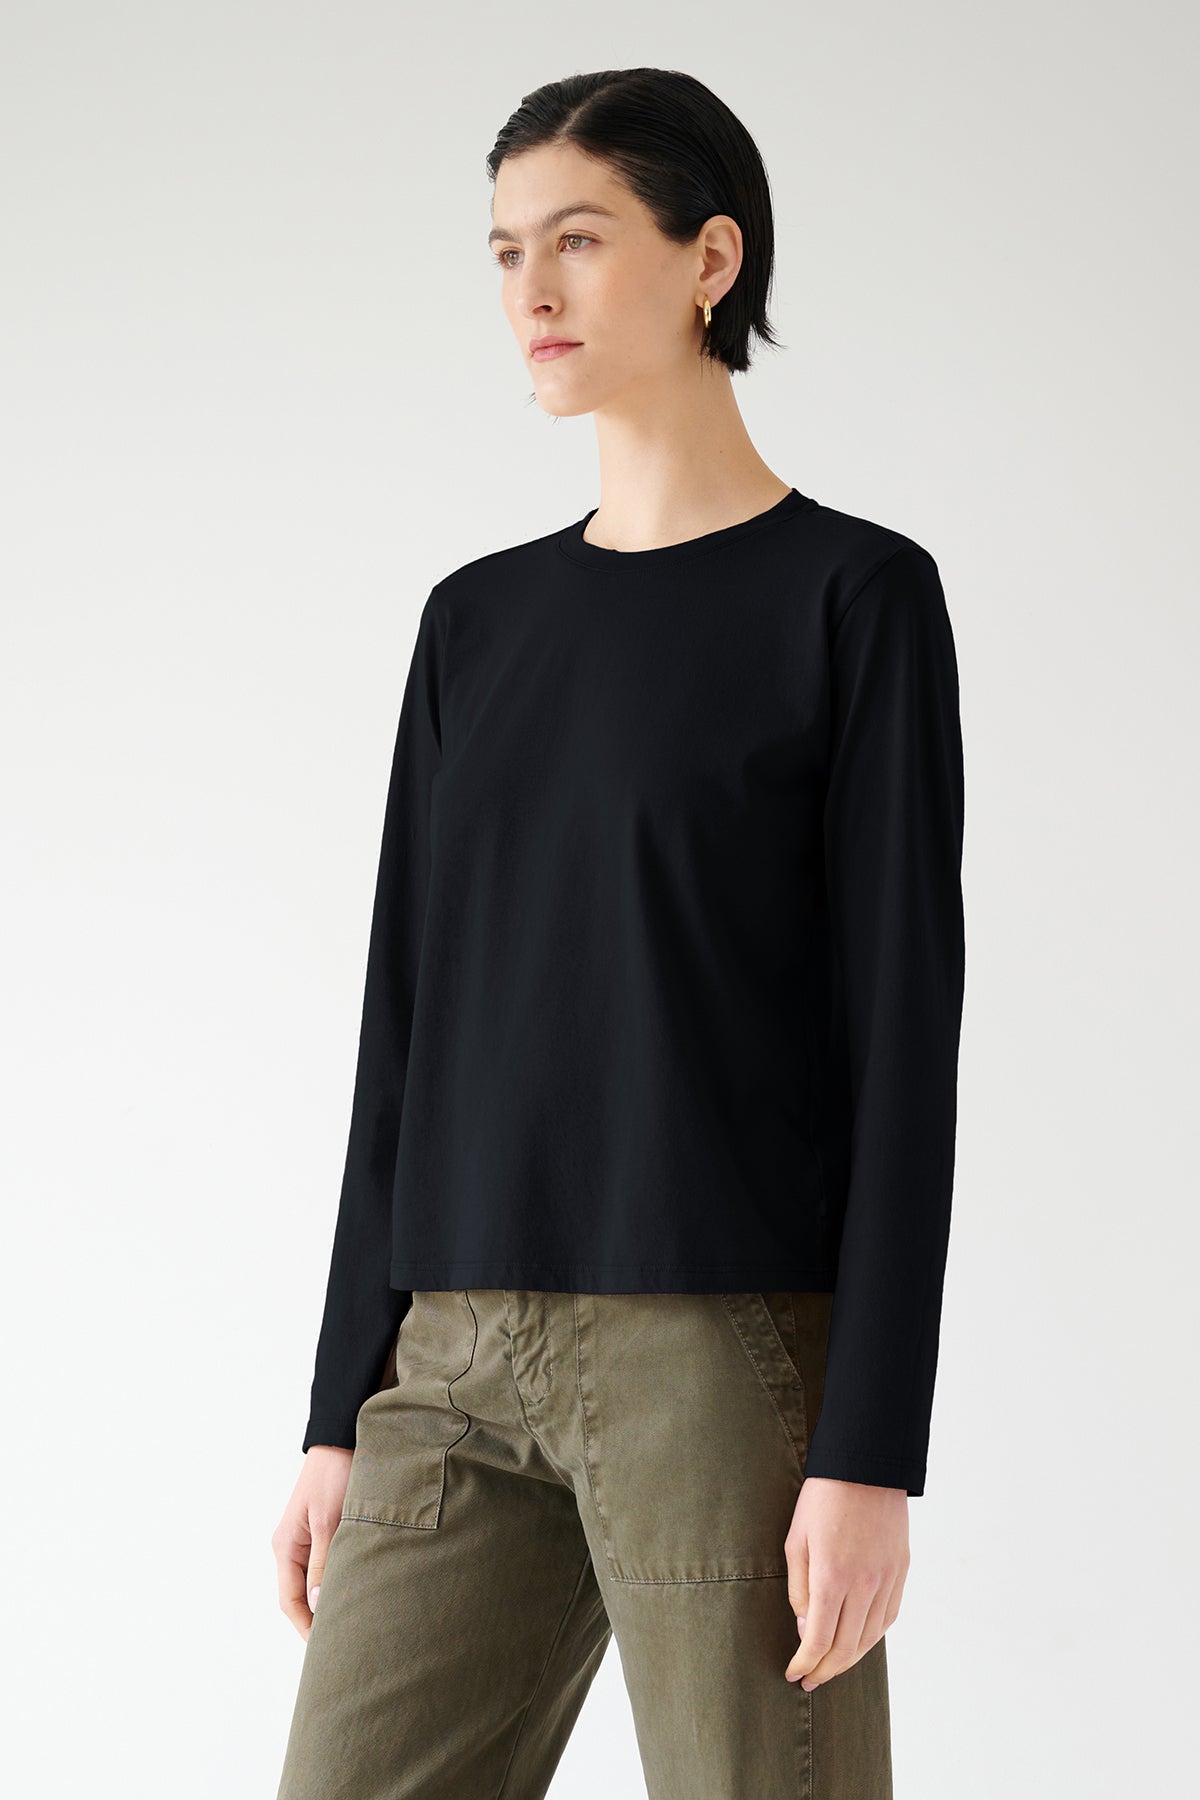   Woman posing in a seasonless Vicente Tee made of organic cotton by Velvet by Jenny Graham and olive green trousers against a white background. 